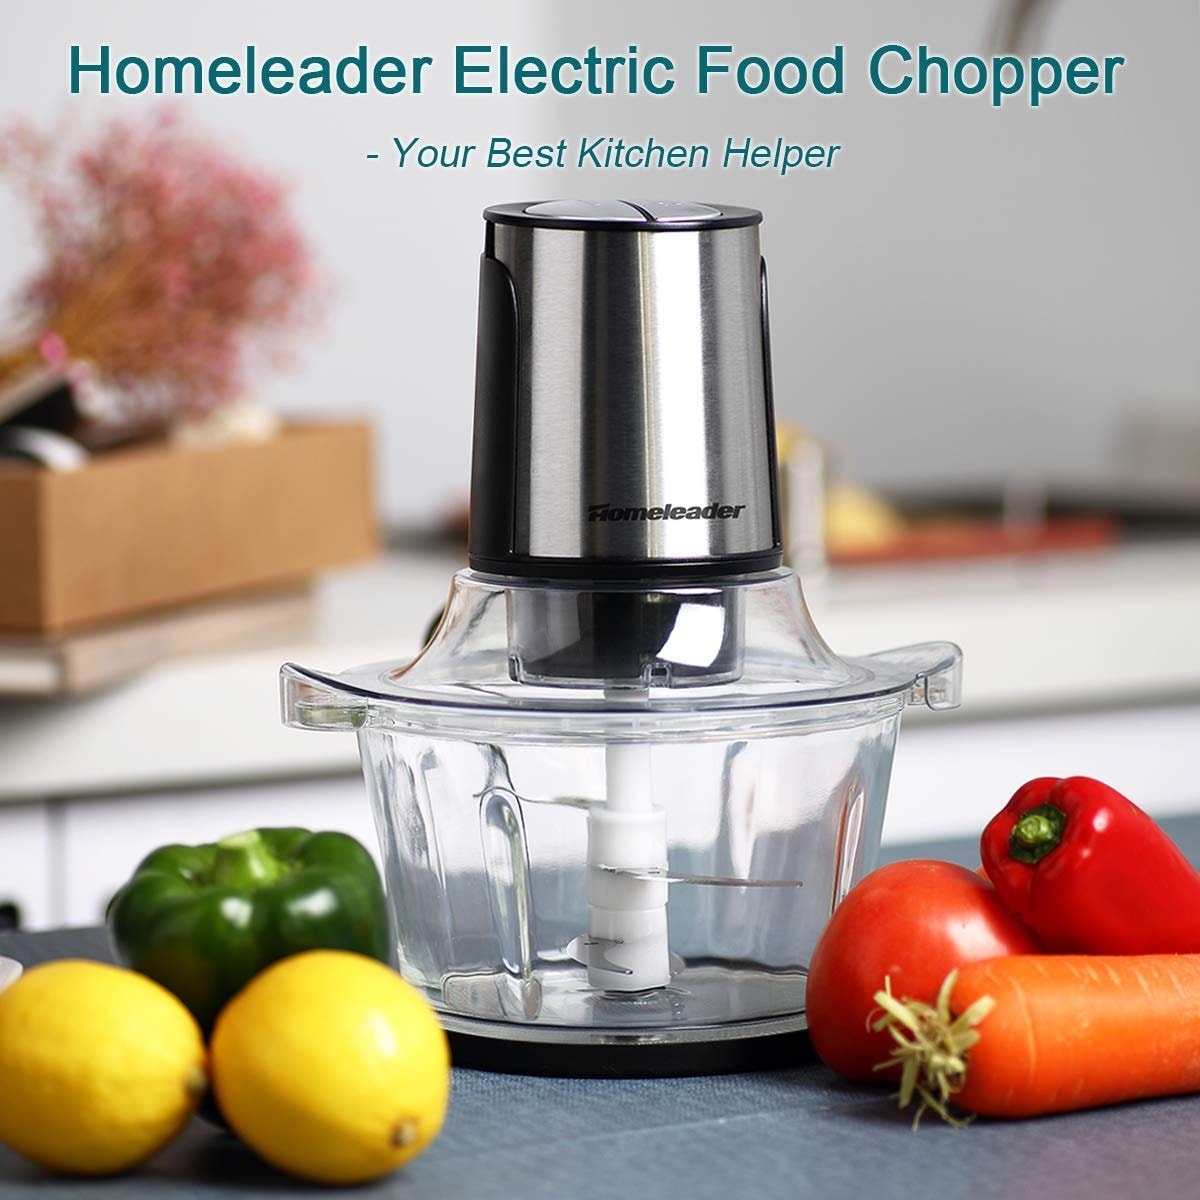 https://ak1.ostkcdn.com/images/products/is/images/direct/0ac0e9b737cf4e92cc59f218855305a9fdf03359/Electric-Food-Chopper%2C-8-Cup-Food-Processor-by-Homeleader%2C-2L-BPA-Free-Glass-Bowl-Blender-Grinder.jpg